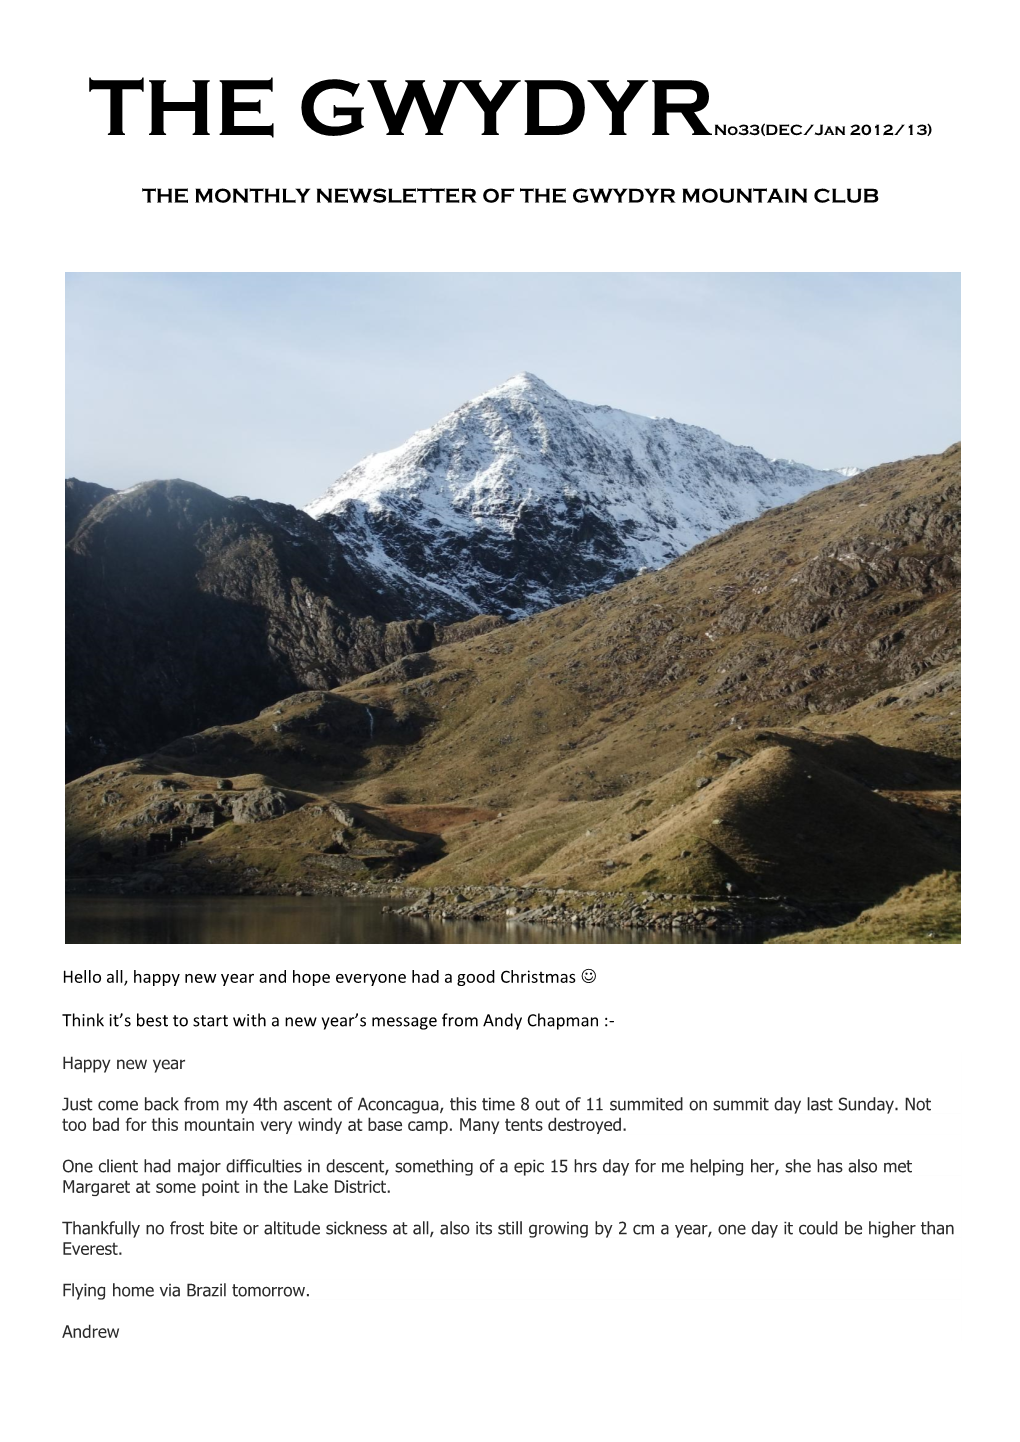 The Monthly Newsletter of the Gwydyr Mountain Club